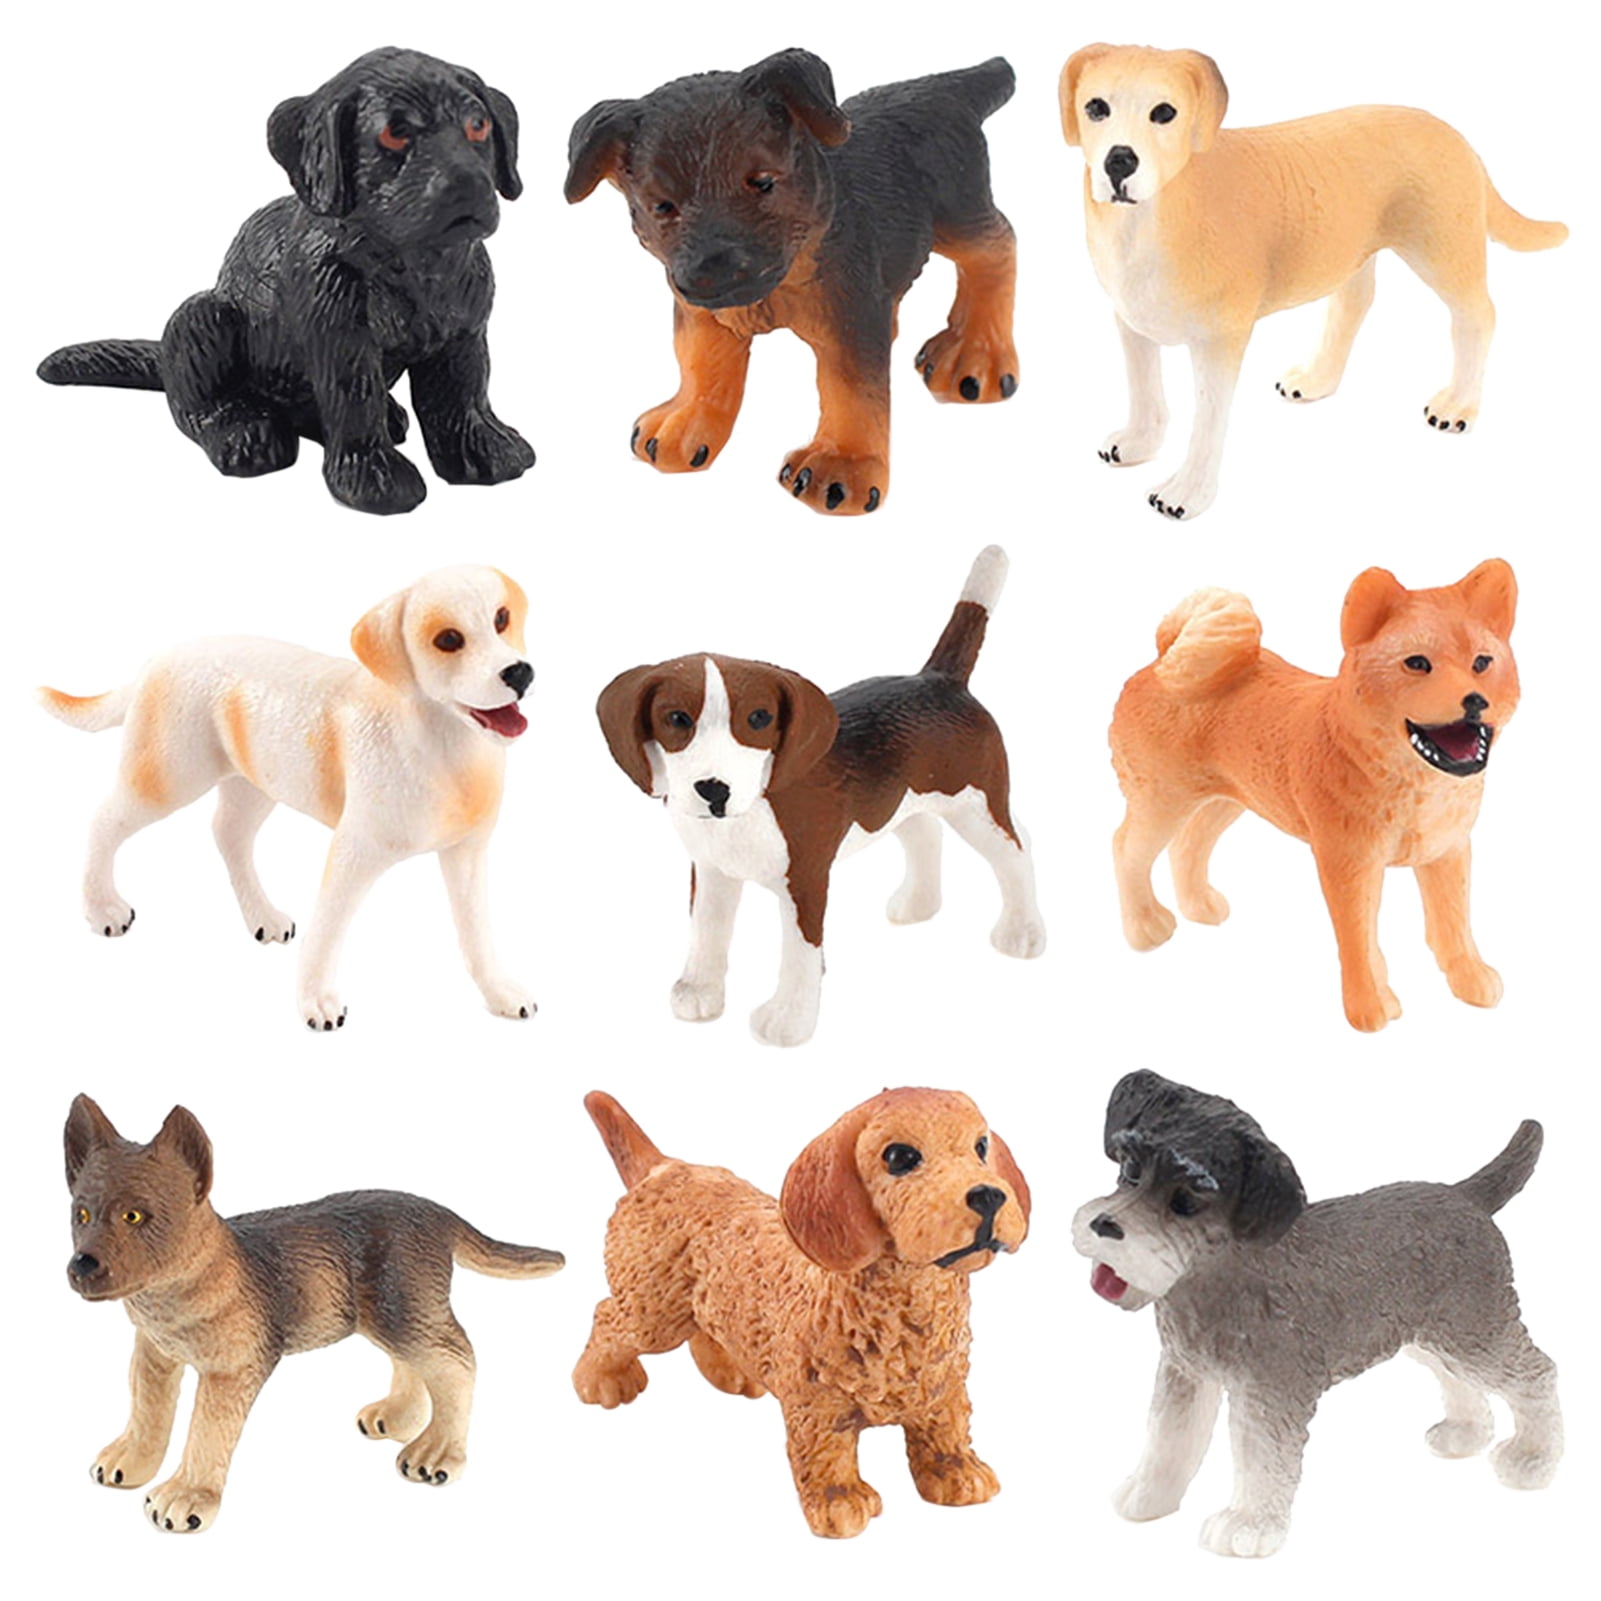 Realistic Detailed Plastic Puppy Figures Toymany 10Pcs Dog Figurines Playset H 